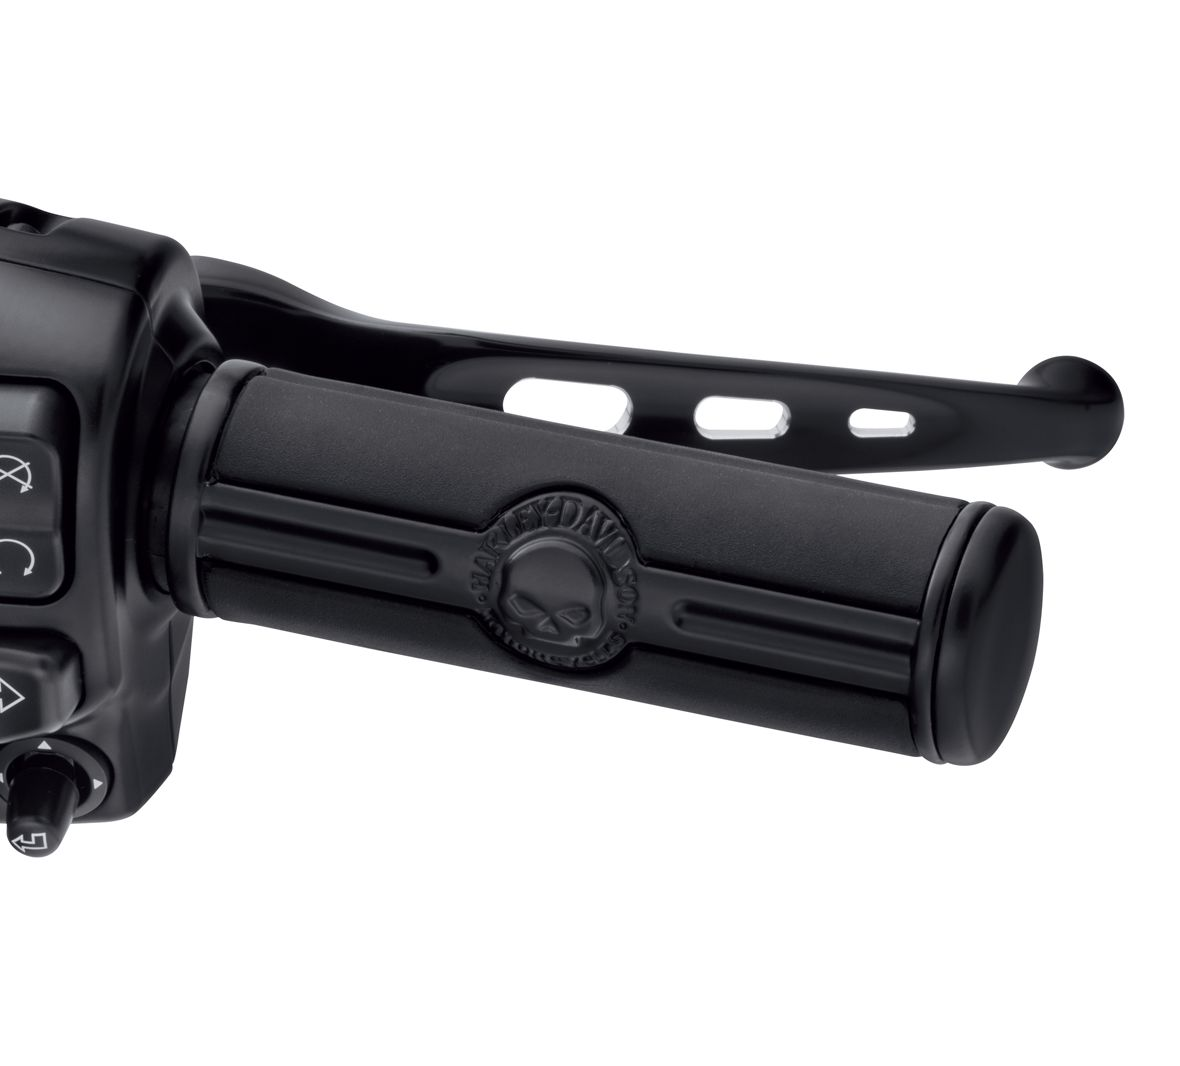 Harley-Davidson® Willie G Skull Hand Grips - Black - 56100364.  Contrasting the sinister Willie G® Skull logo surrounded by Harley-Davidson® script, the raised rubber pads add positive grip and comfort for the long haul.